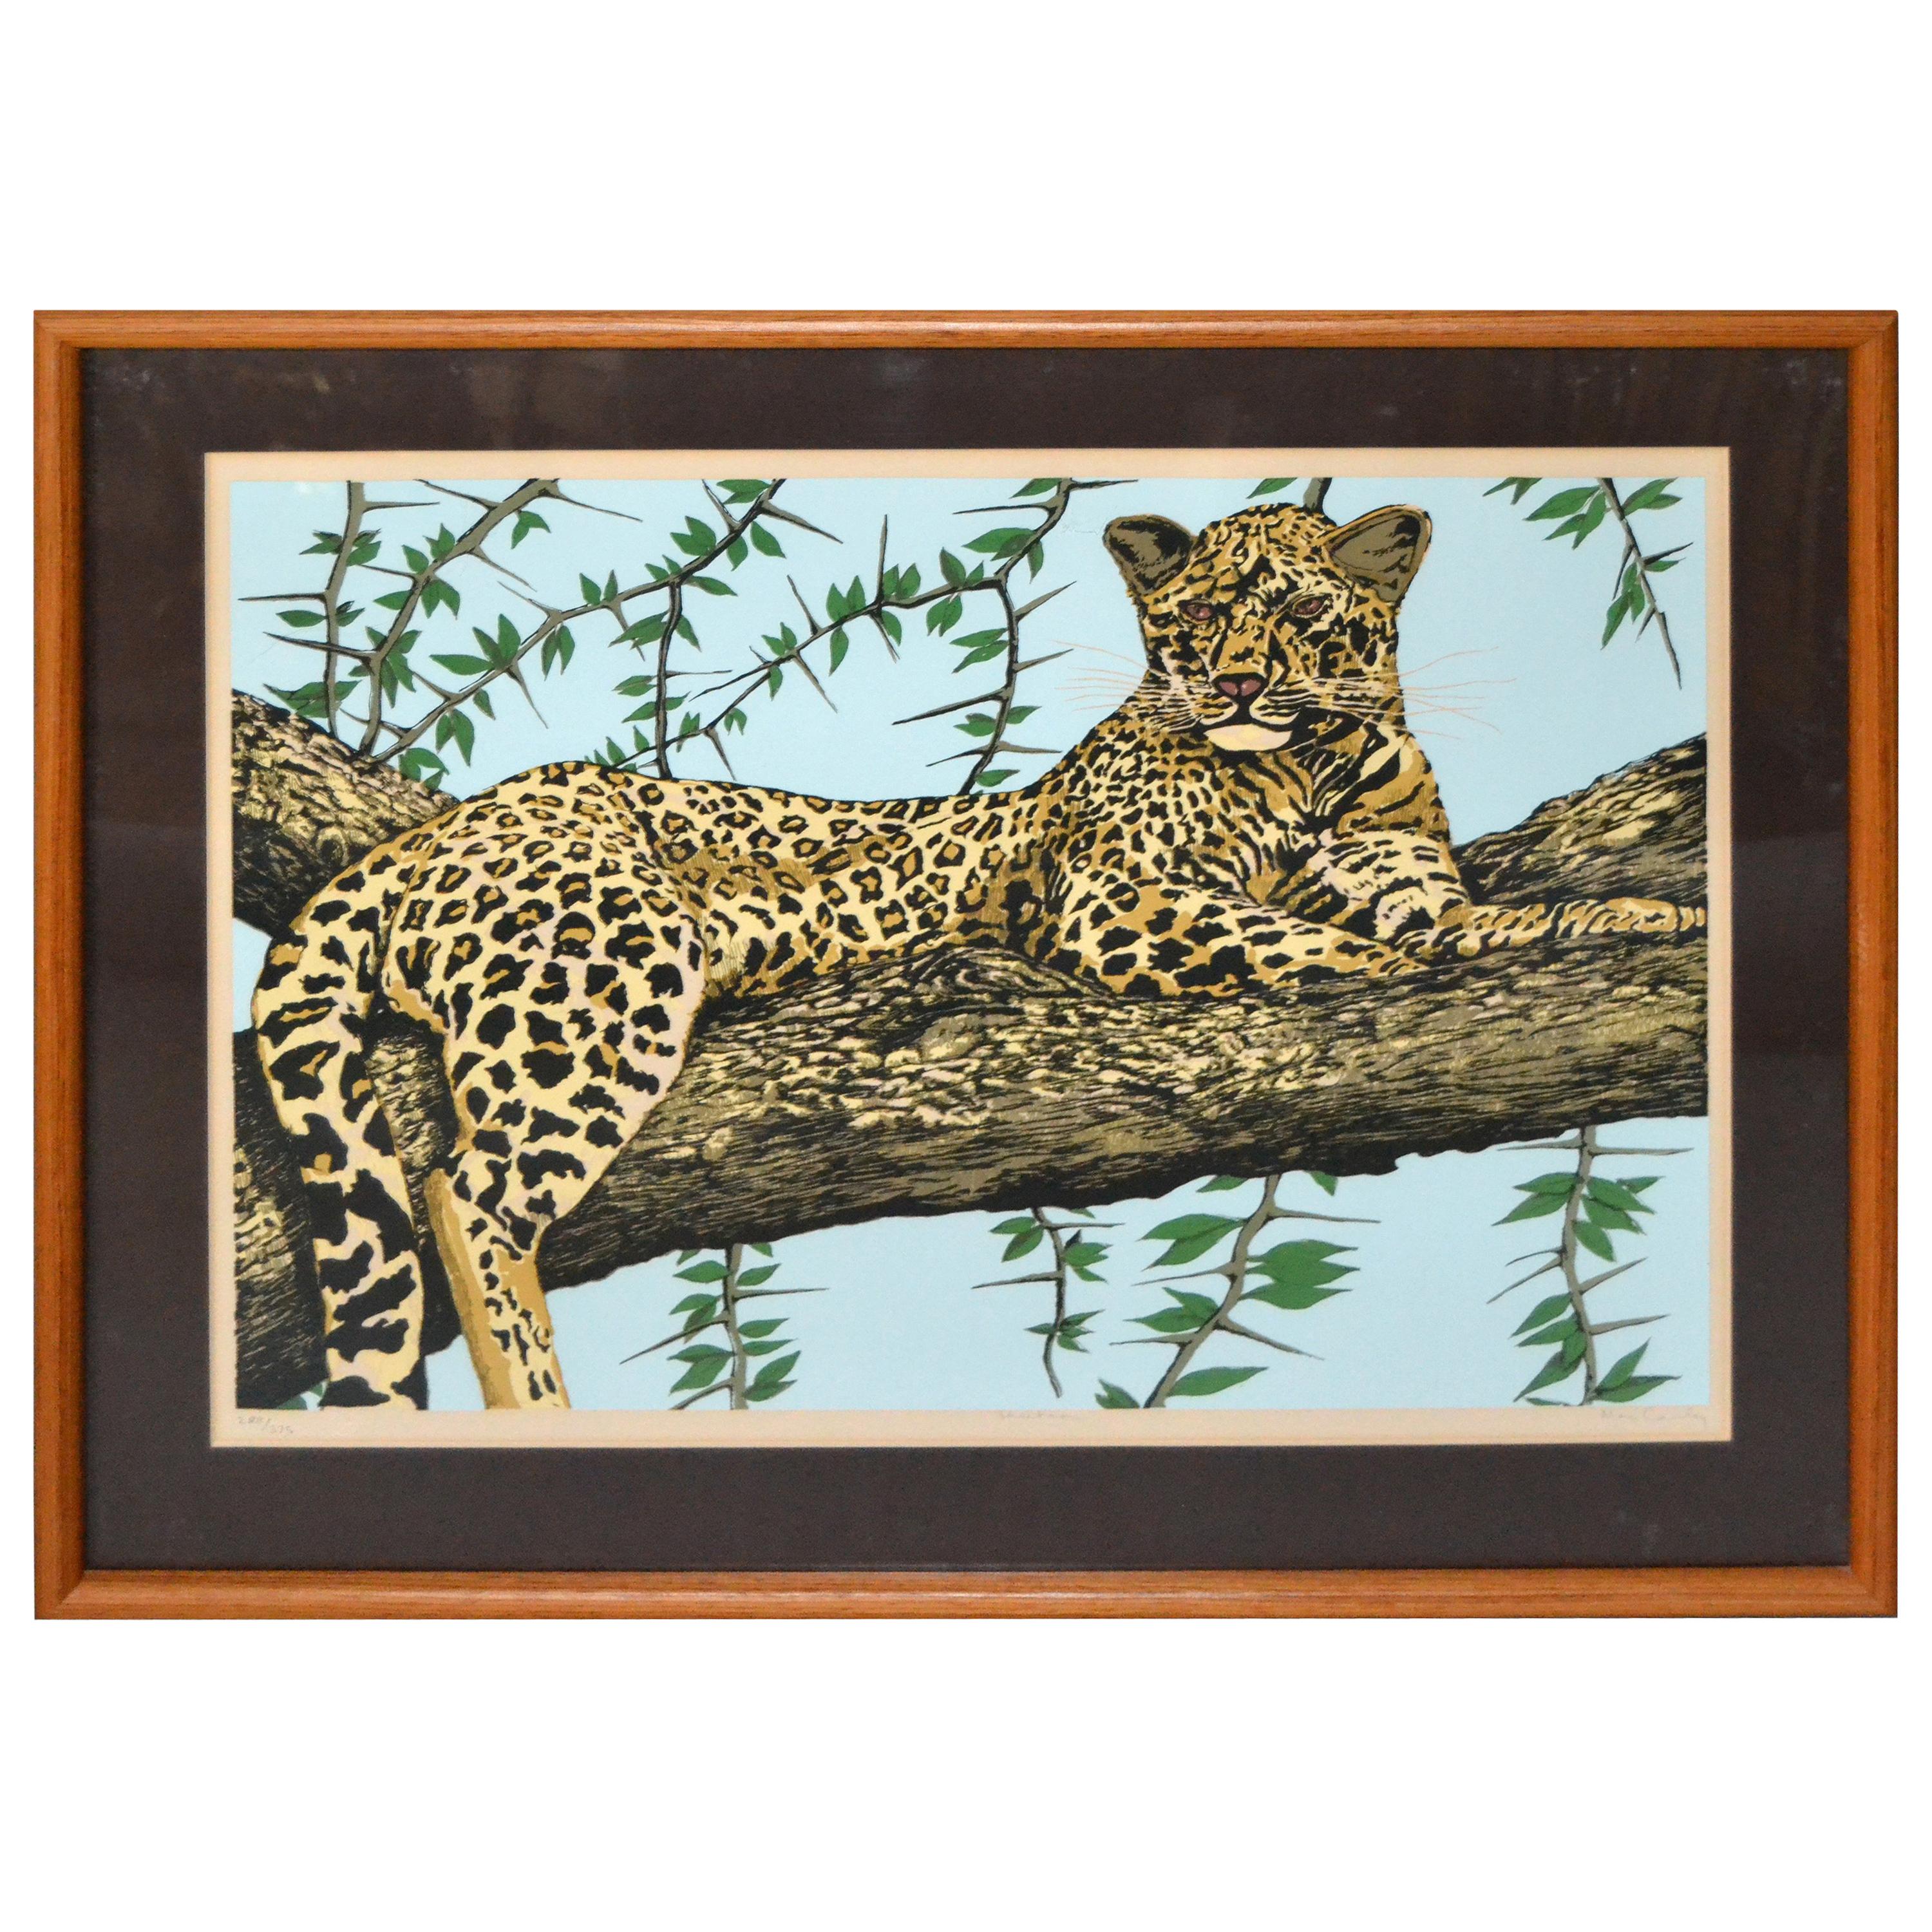 Original Lithograph Cheetah Signed by Artist Mac Couley